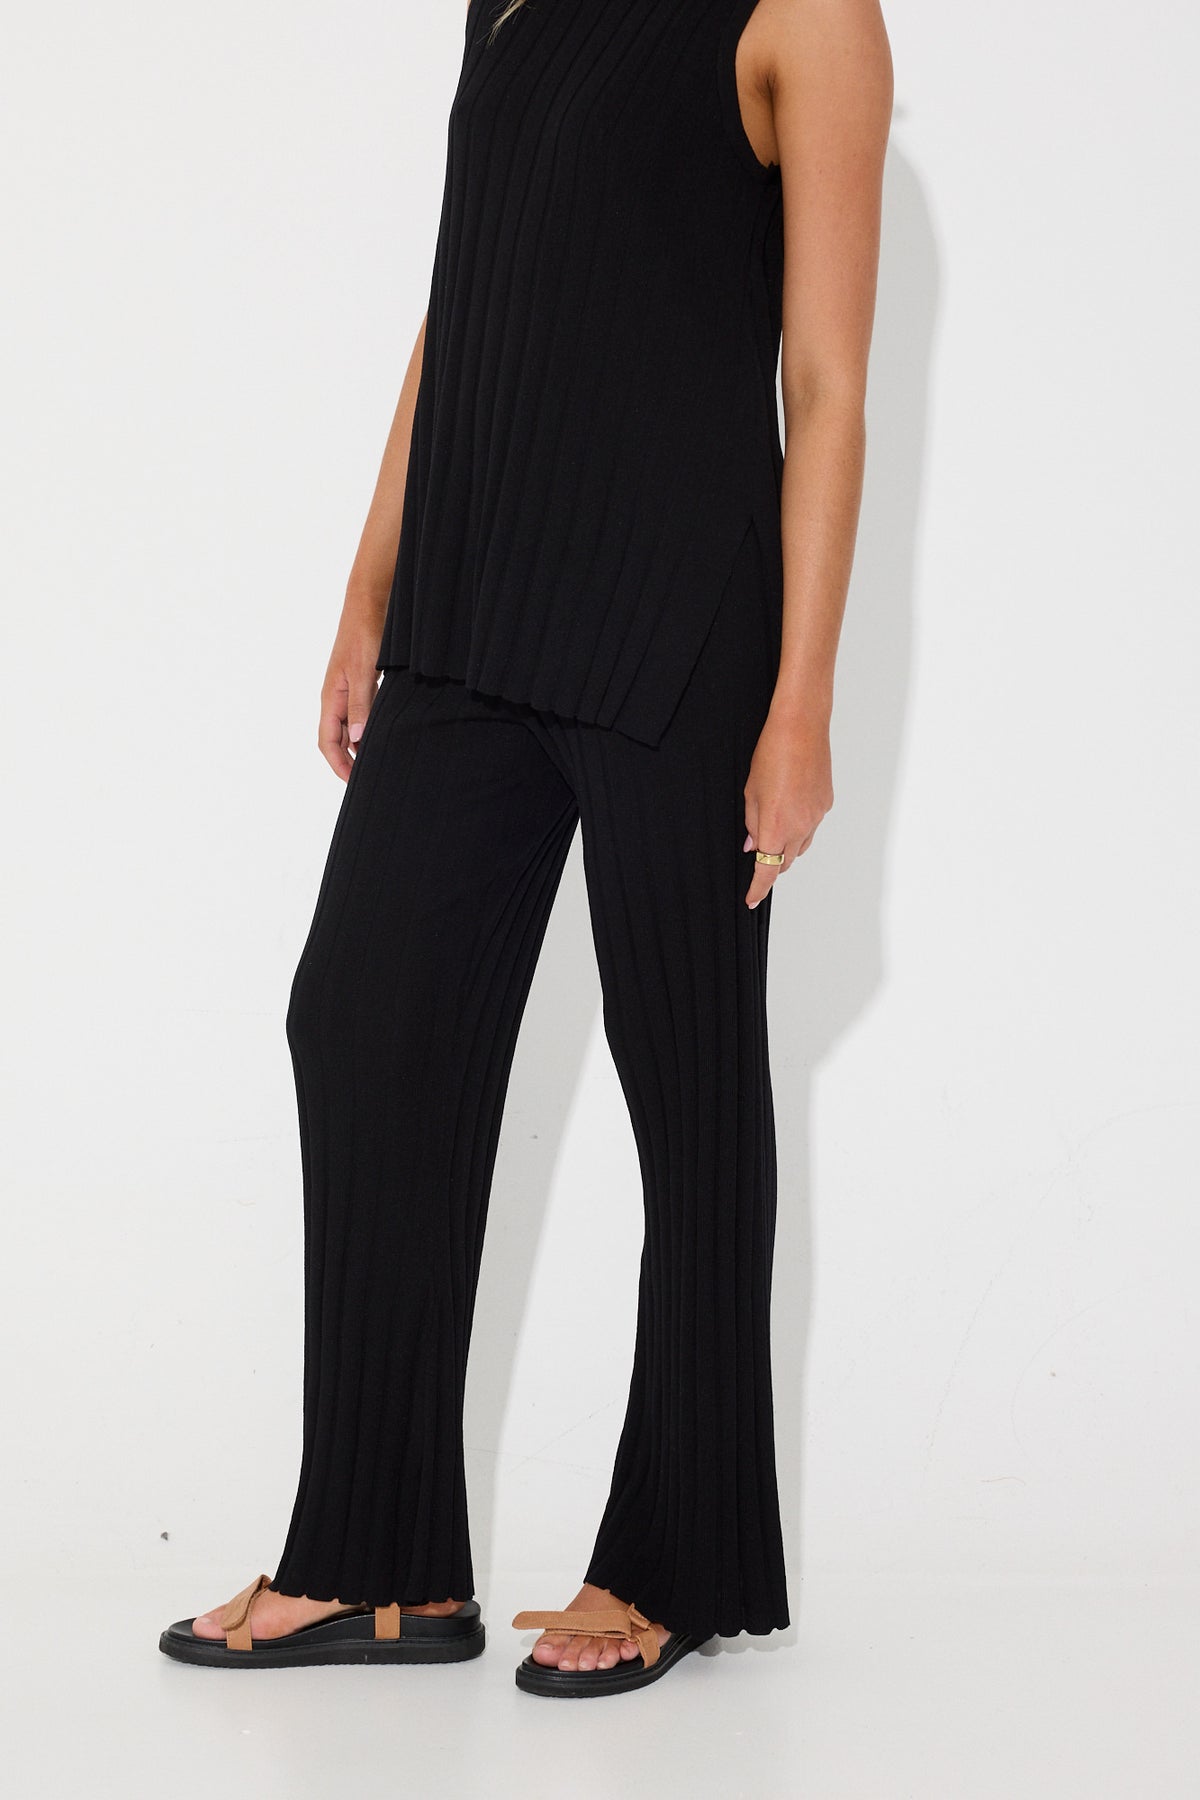 Lucia Ribbed Pant Black